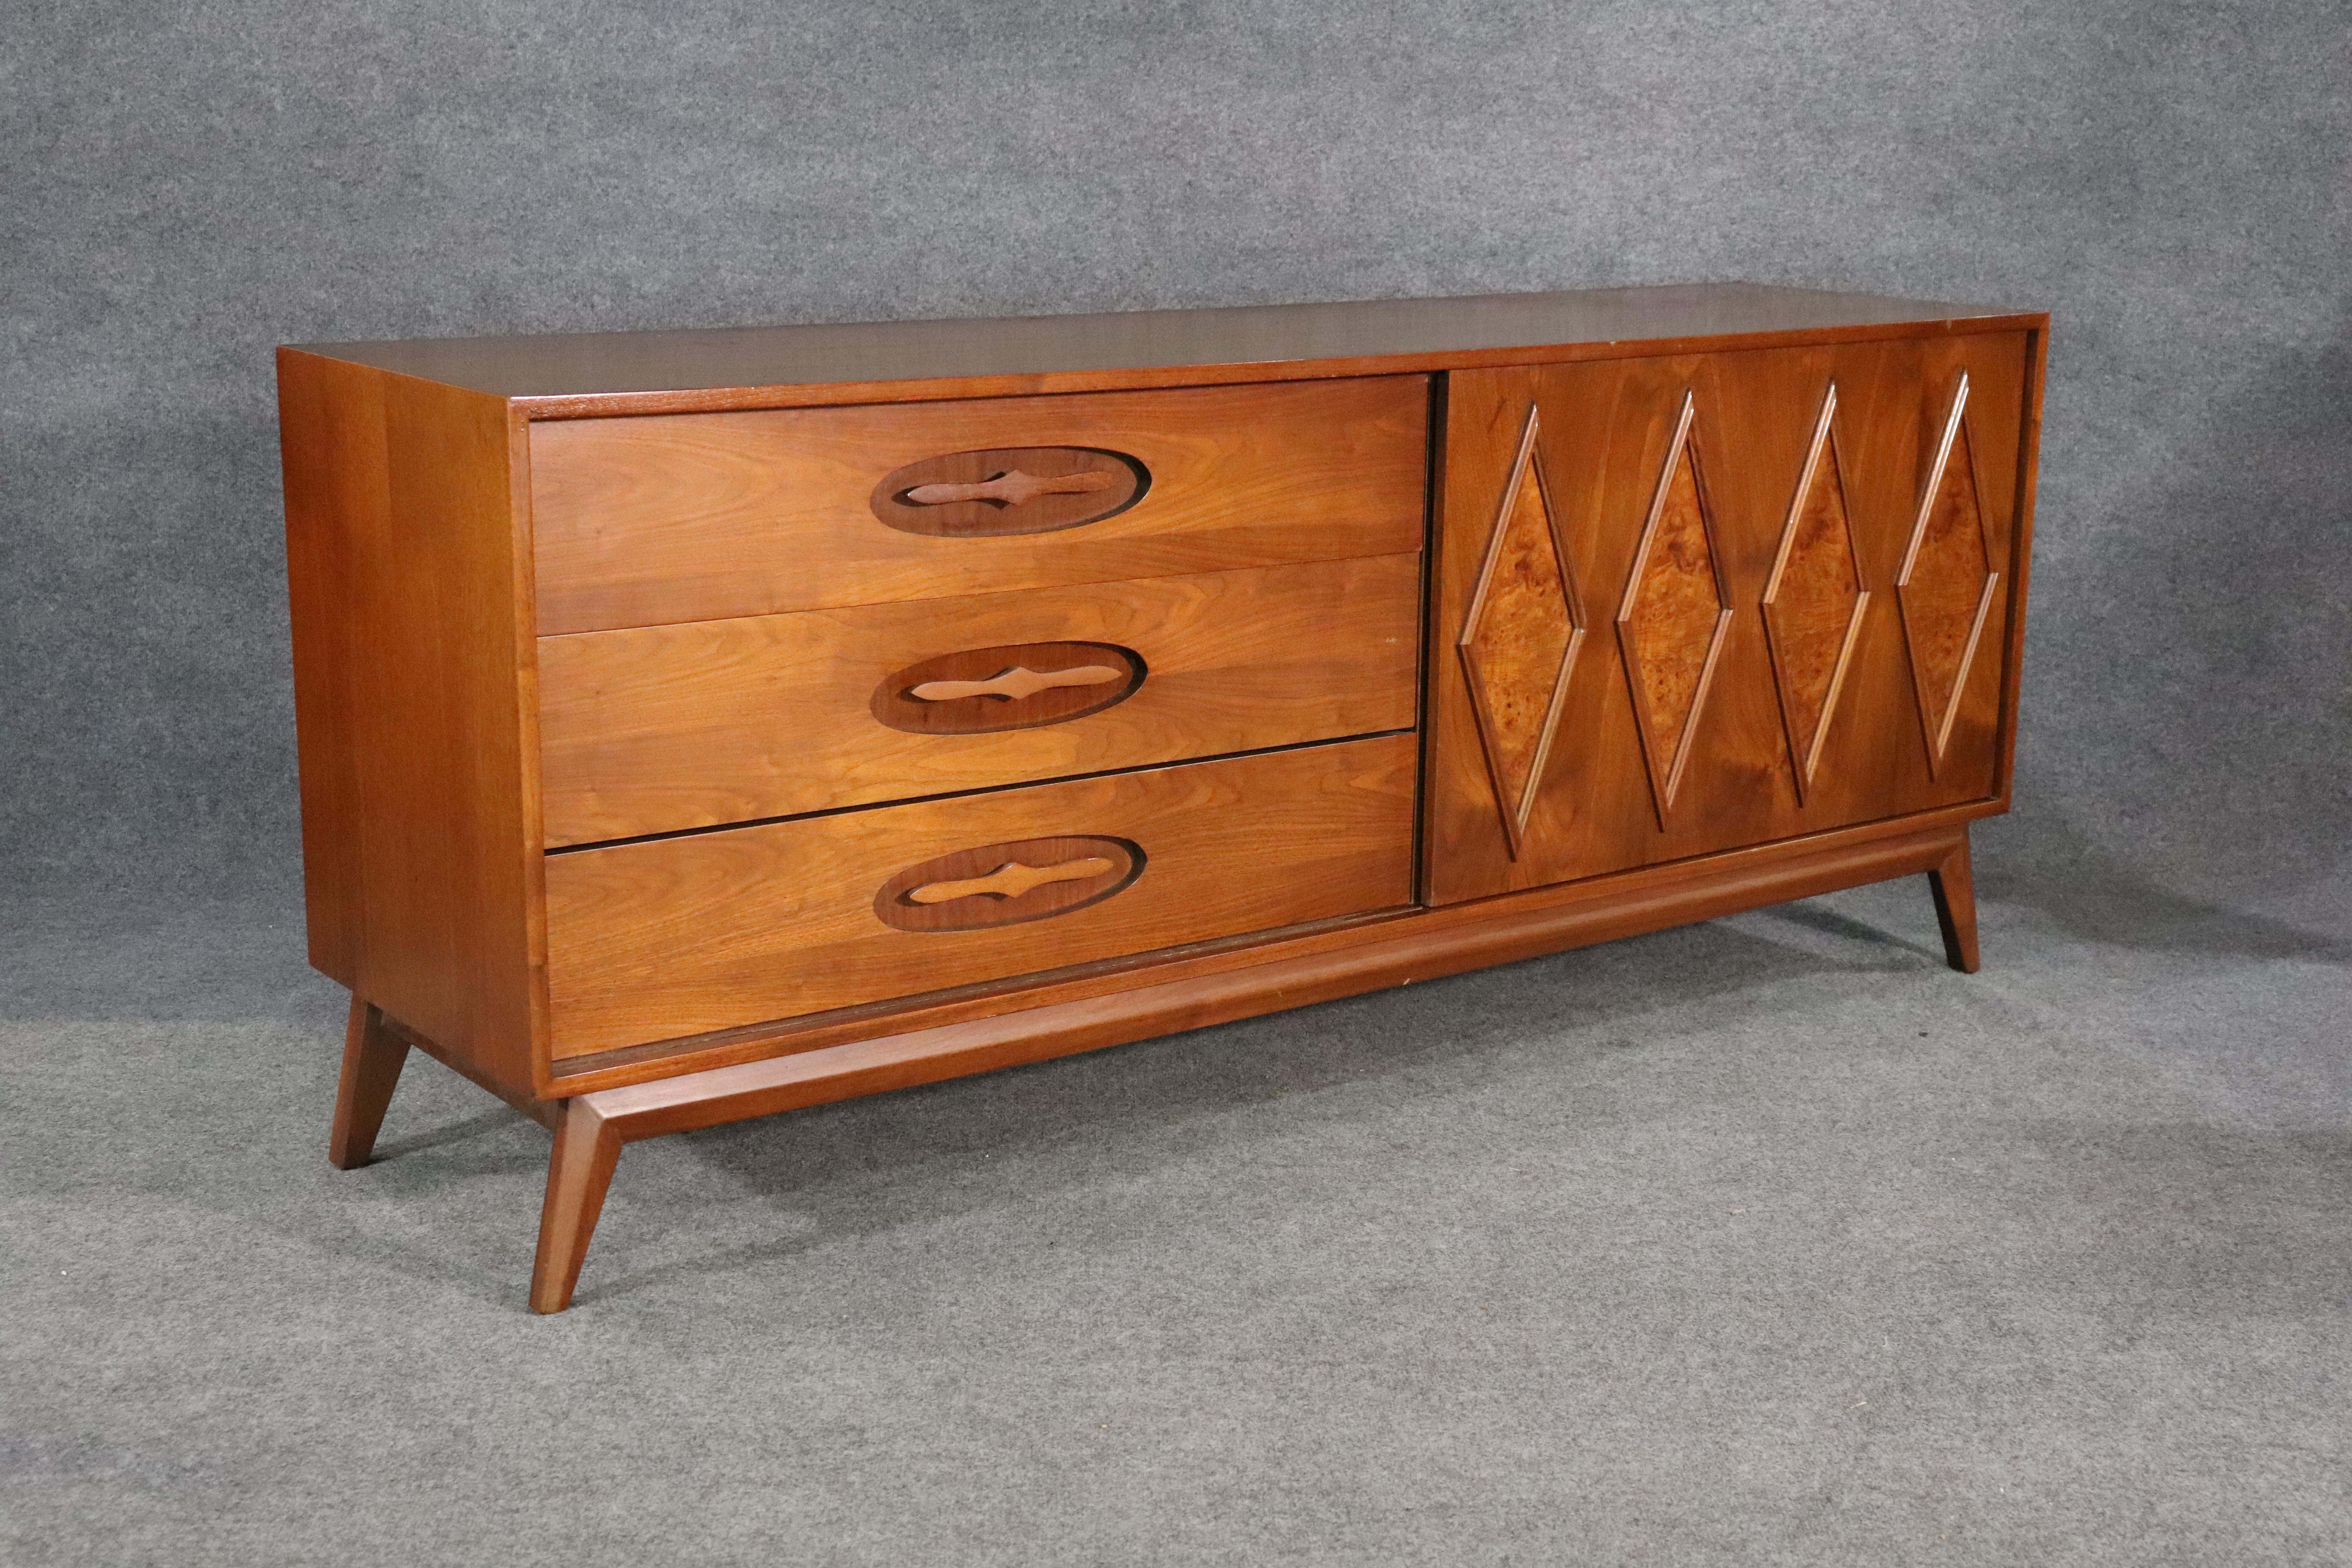 Long American made dresser with sliding door. Six wide drawers, sculpted inset handles and burl veneer diamond shaped accents.
Please confirm location NY or NJ